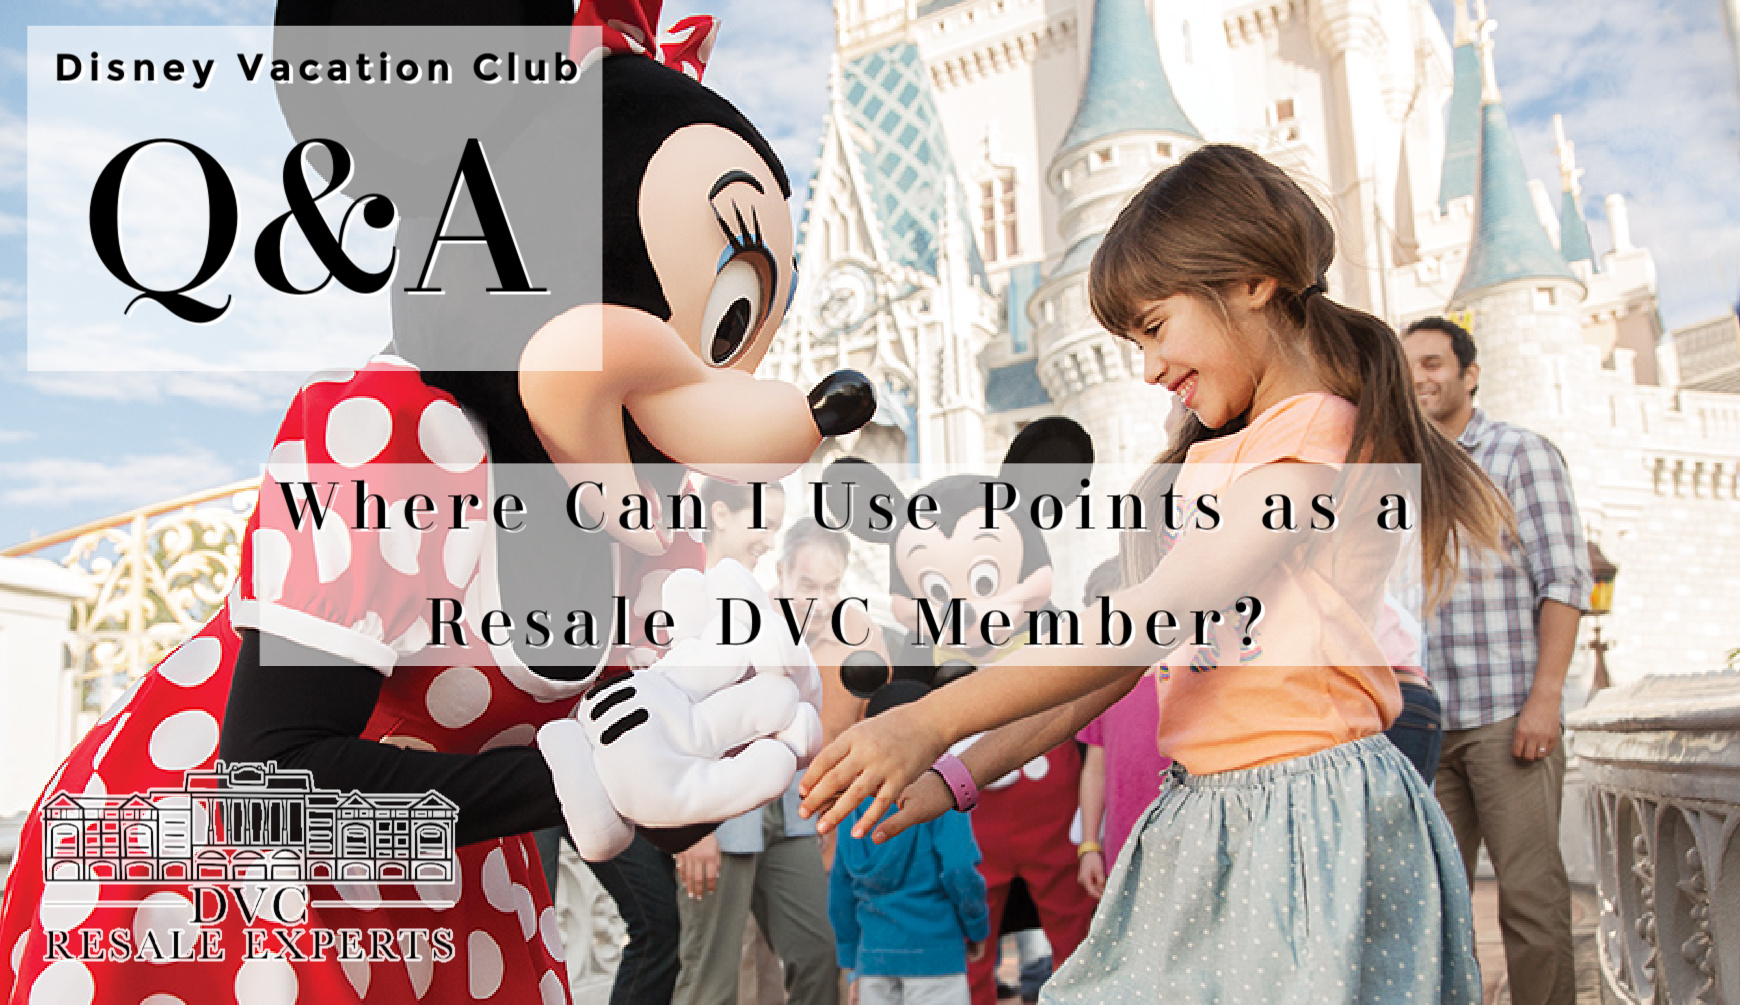 Where Can I Use Points as a Resale DVC Member